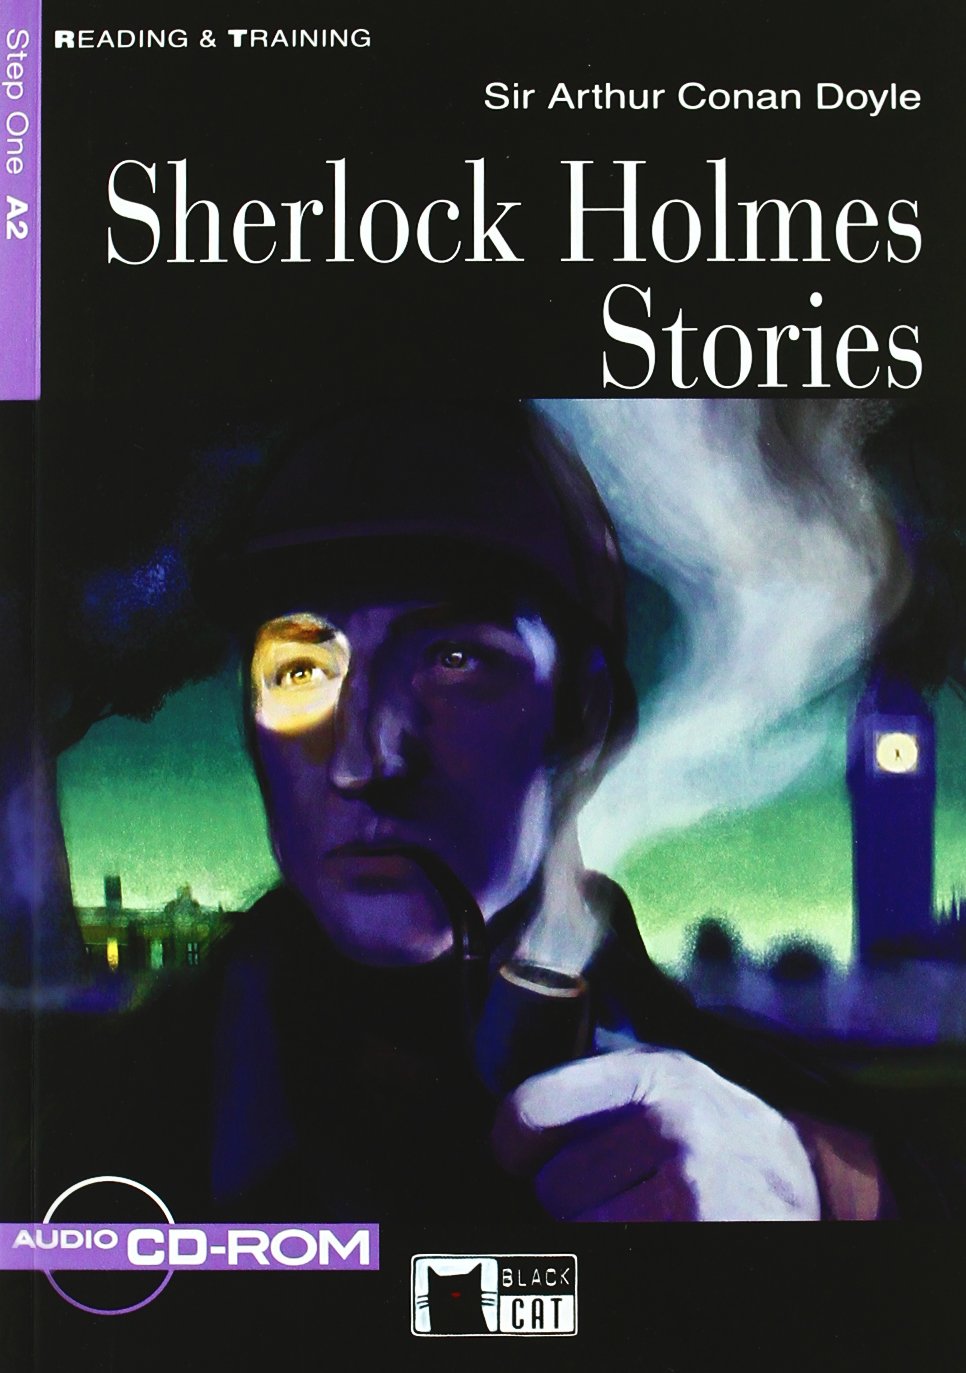 SHERLOCK HOLMES STORIES (READING & TRAINING STEP1, A2) Book+ AudioCD+CD-ROM